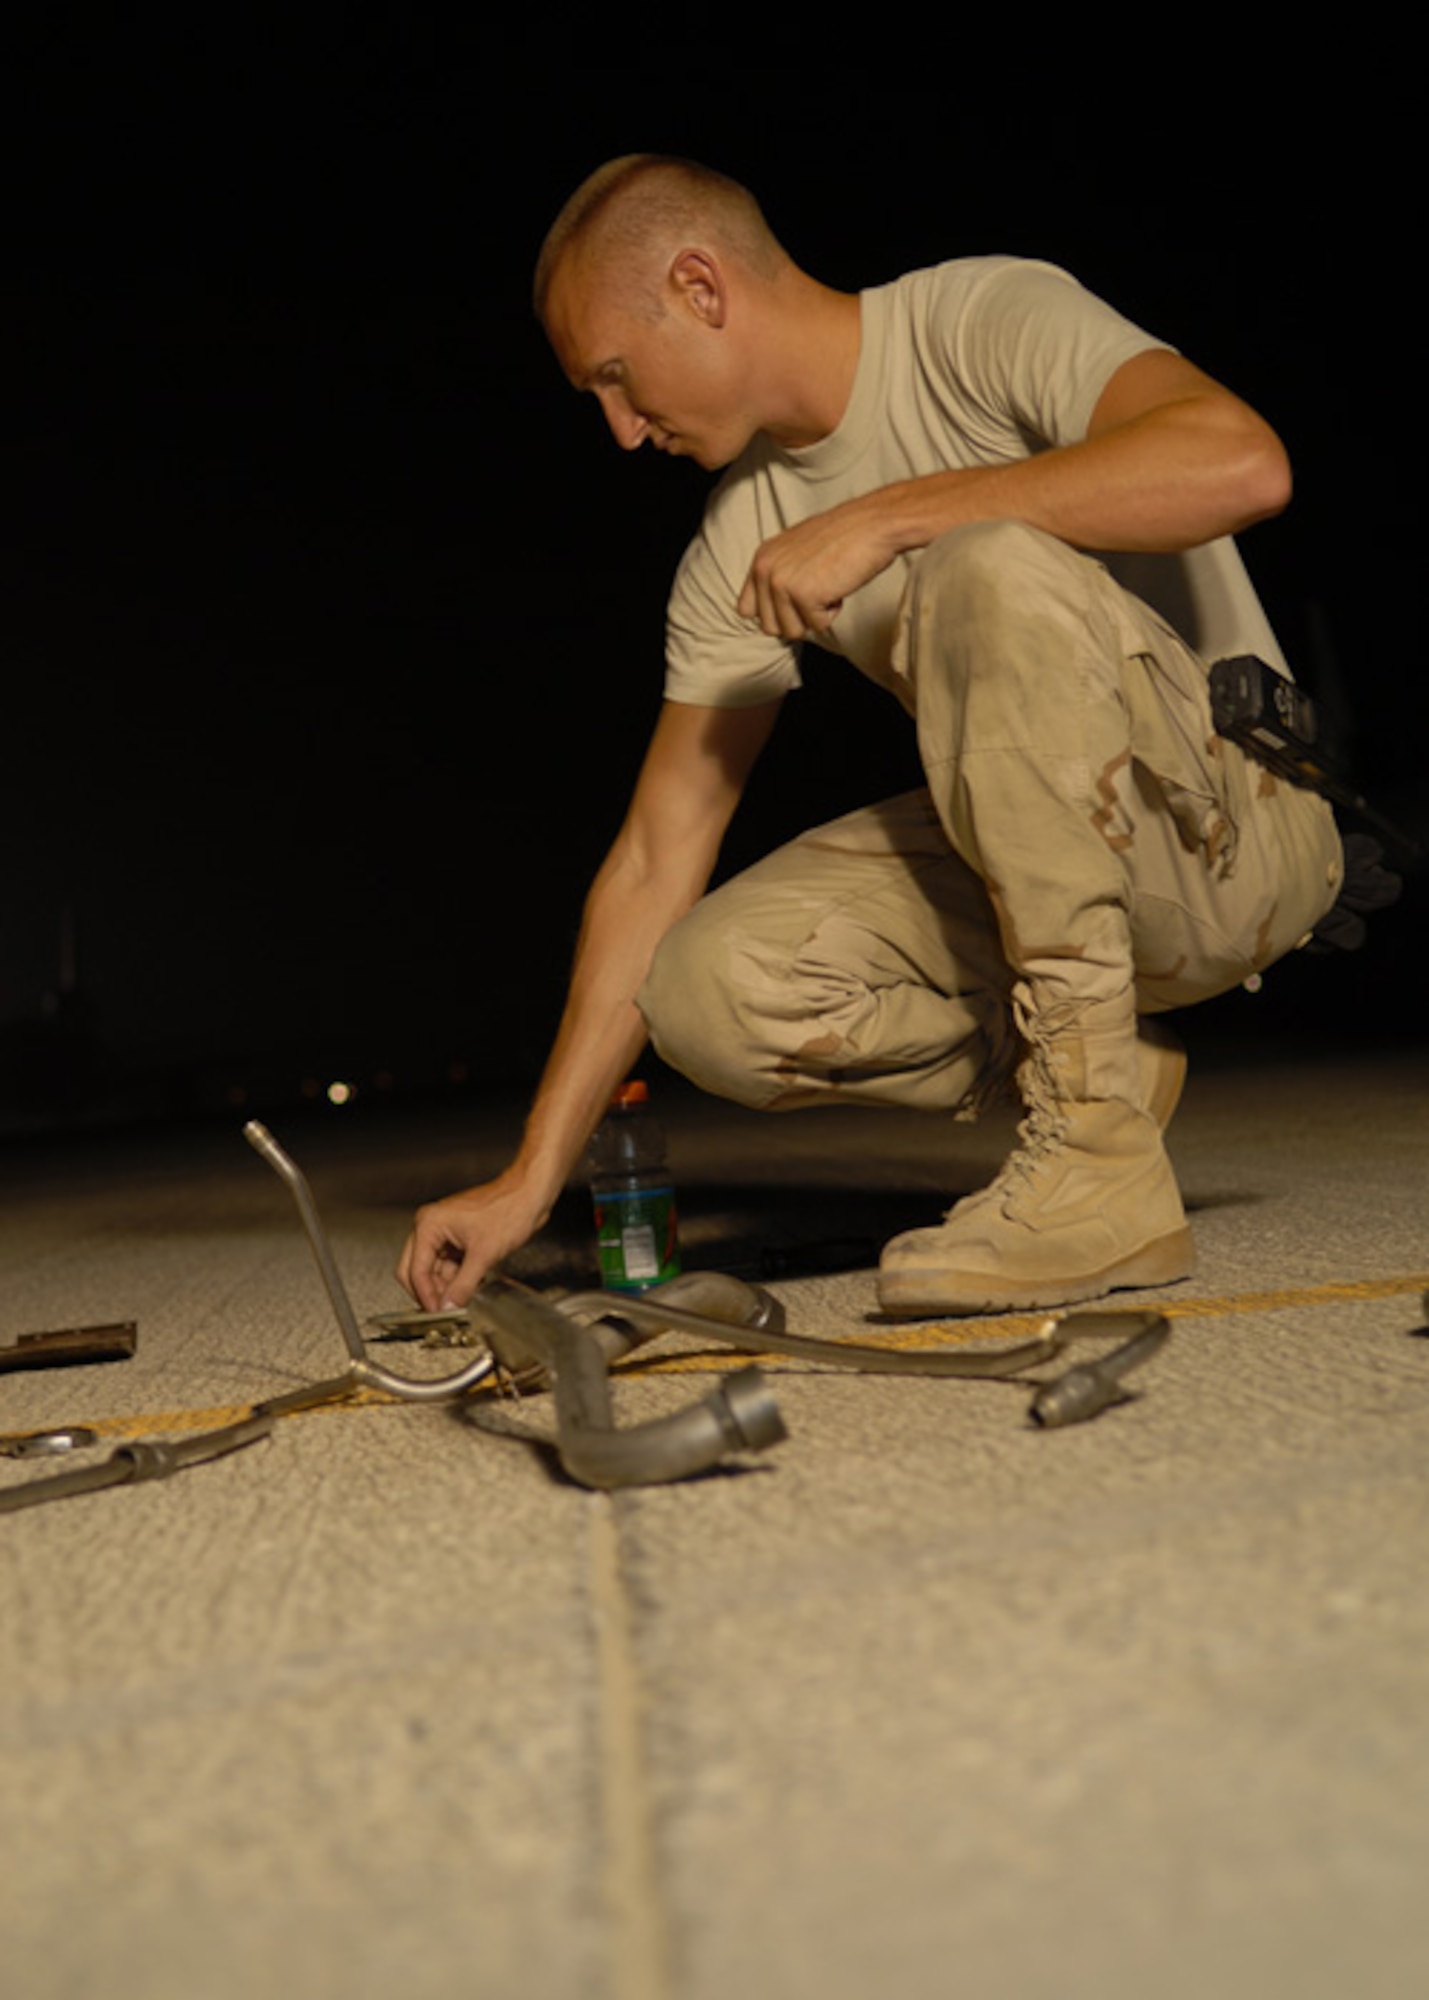 SOUTHWEST ASIA -- The 380th Expeditionary Maintenance Squadron's Staff Sgt. Ryan Pierce, an aero repair specialist, ensures all parts are accounted for after removing a hydraulic package from an E-3 Sentry's engine Sunday. The parts will be inventoried and stored for future use. Accounting for all the parts is a prevention measure toward mitigating foreign object damage to aircraft. (U.S. Air Force Photo/Tech. Sgt. Denise Johnson)(released)